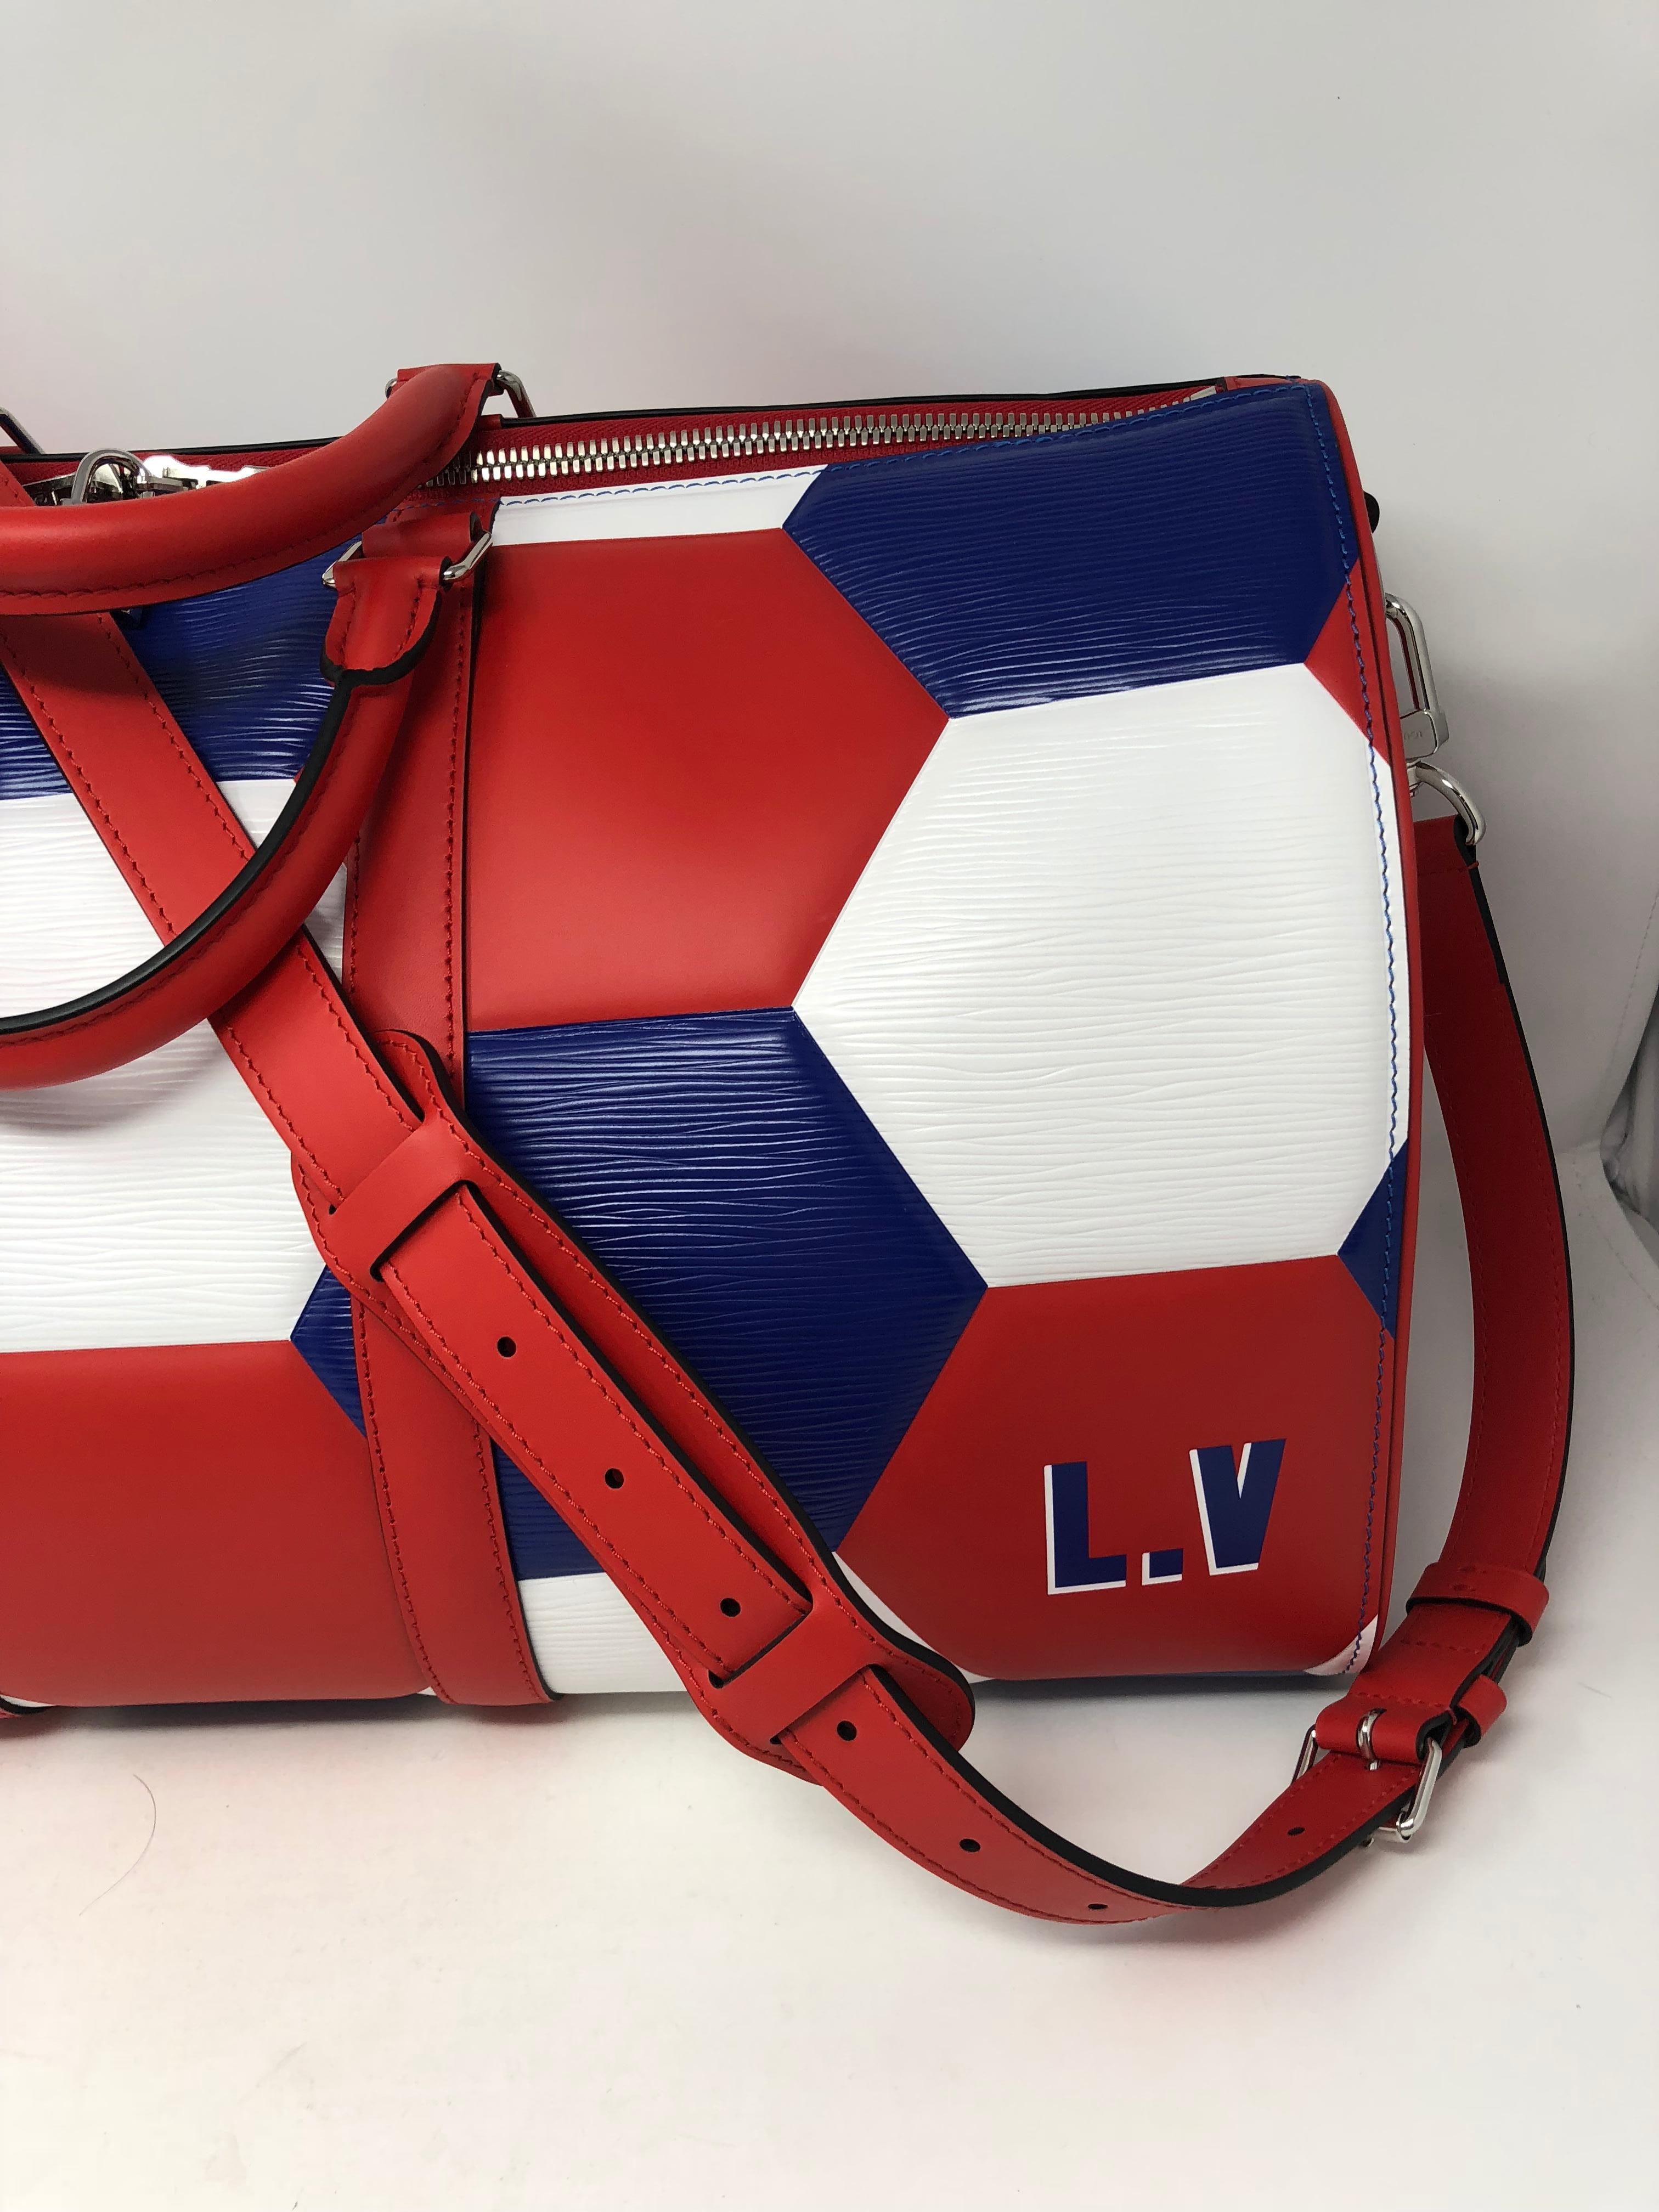 Louis Vuitton 2018 FIFA for World Cup Soccer Special Order Keepall 50 with strap. One of a kind since it was specially made for a client. Red, white and blue colors chosen to create this luggage piece. Never got to be used and taken out. Comes with